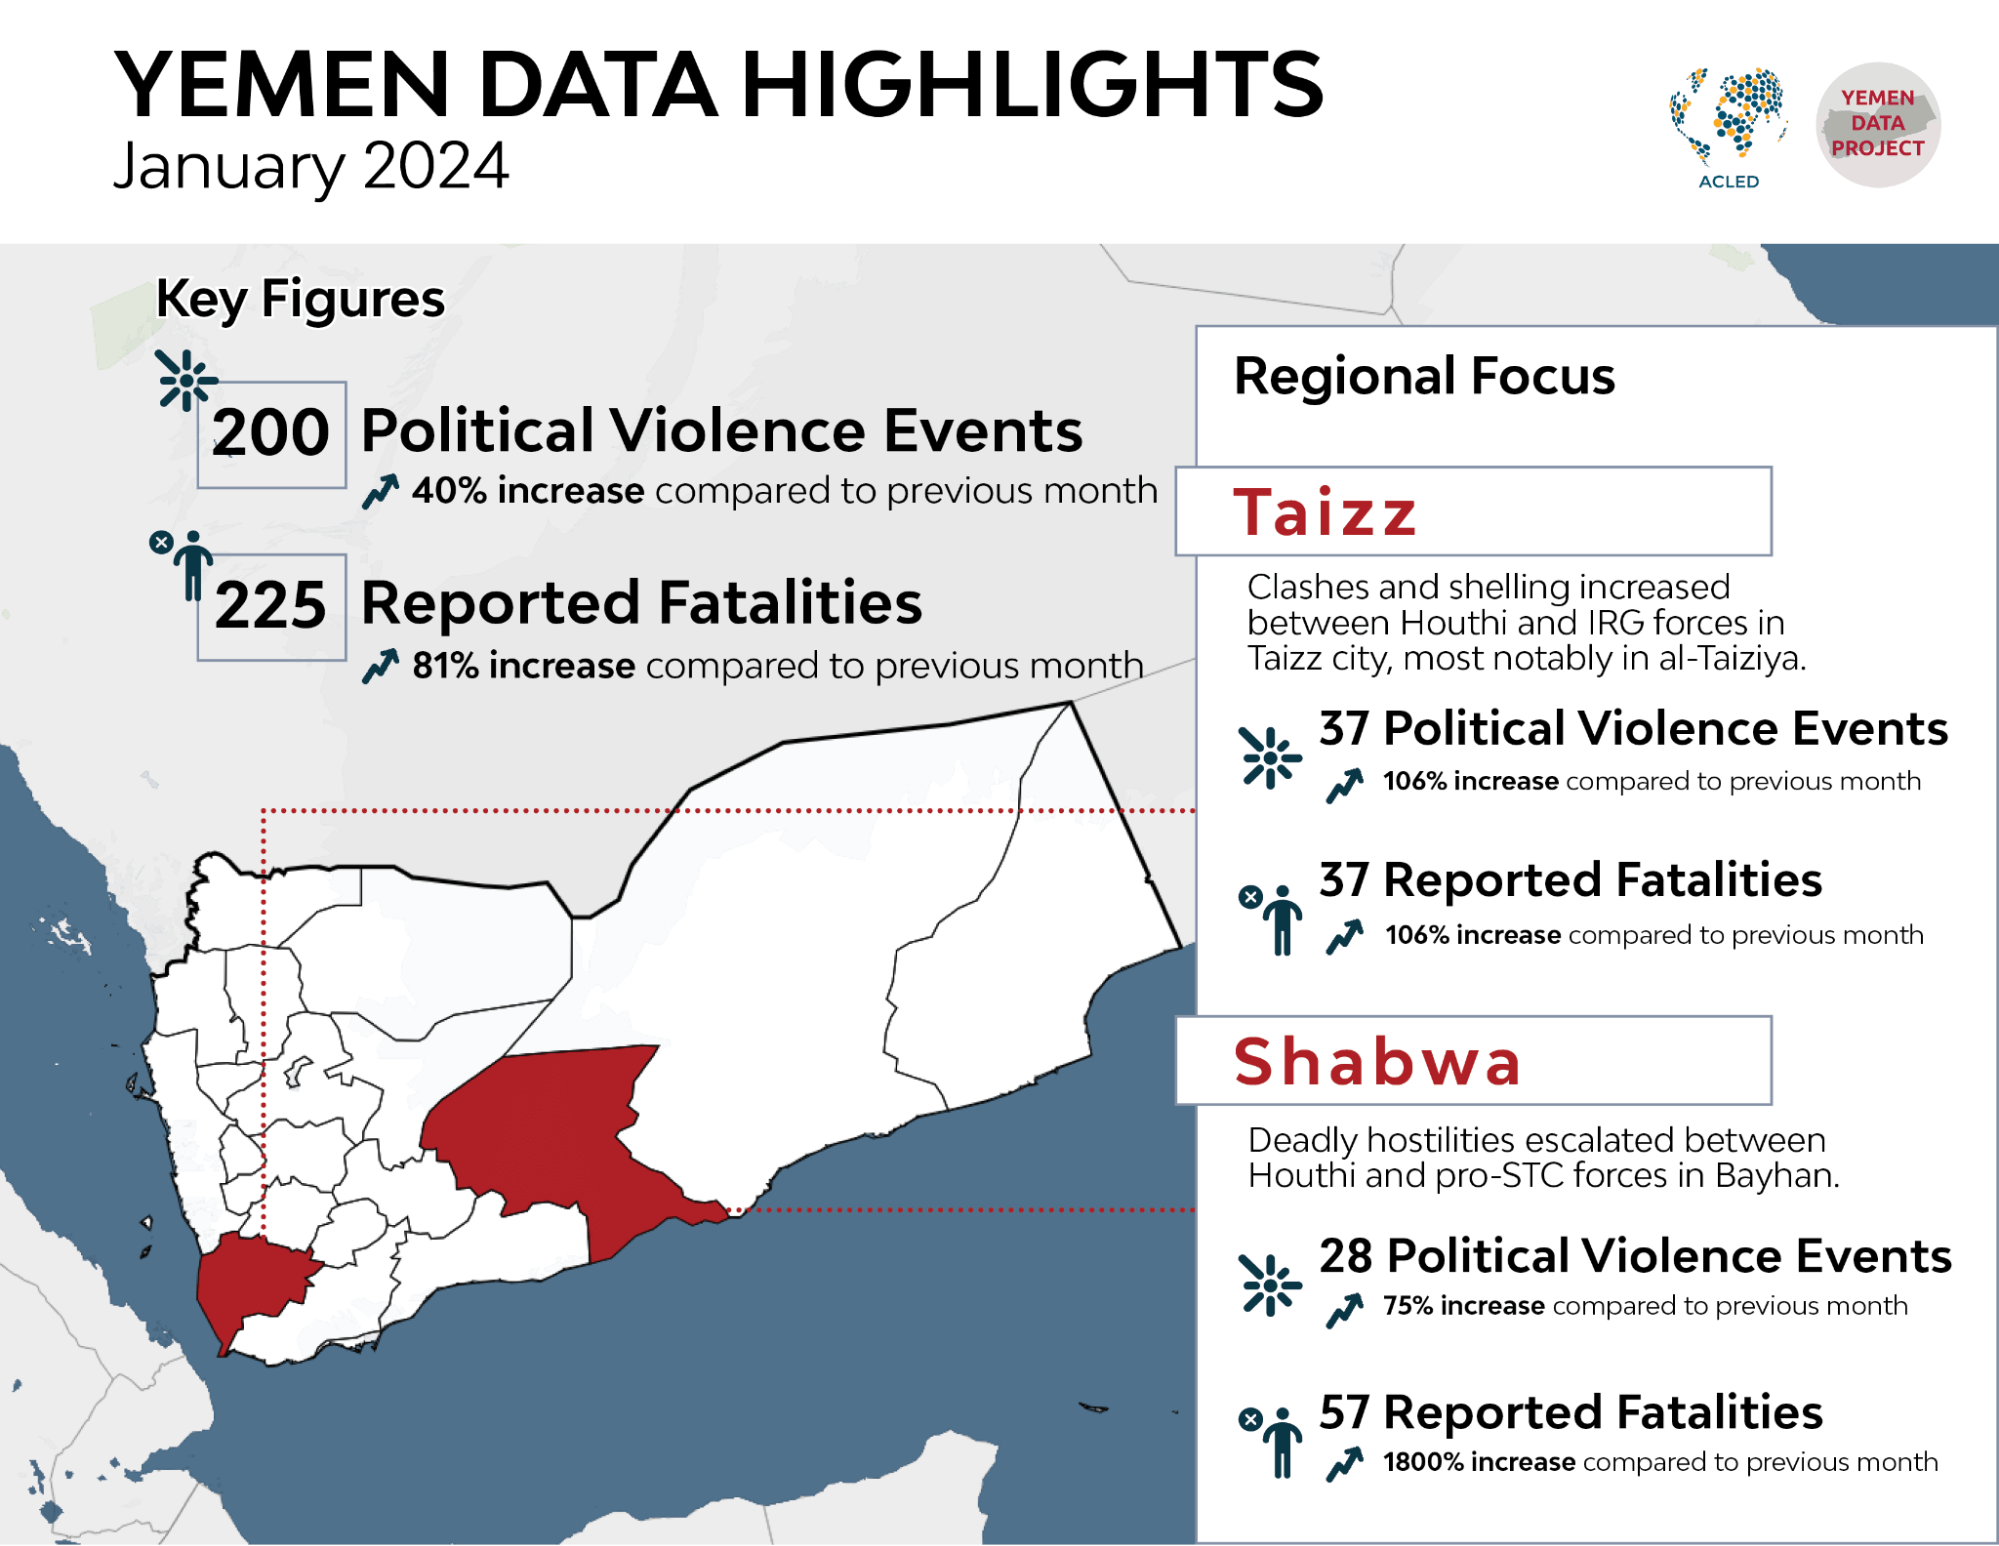 Yemen Data Highlighting political violence events and reported fatalities as of January 2024